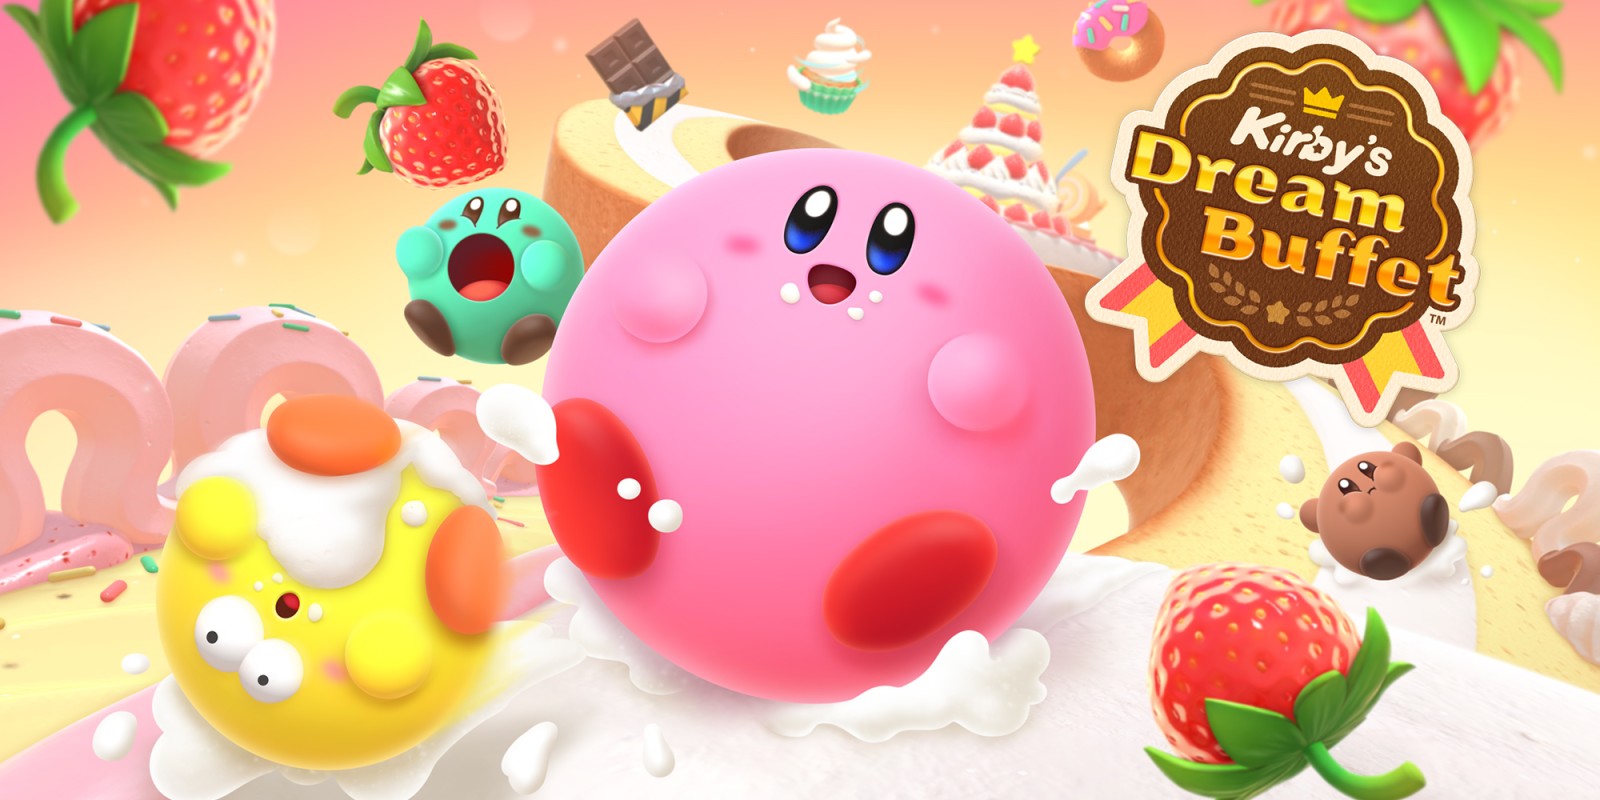 Announcement of Kirby's Dream Buffet - competitive arcade about eating goodies